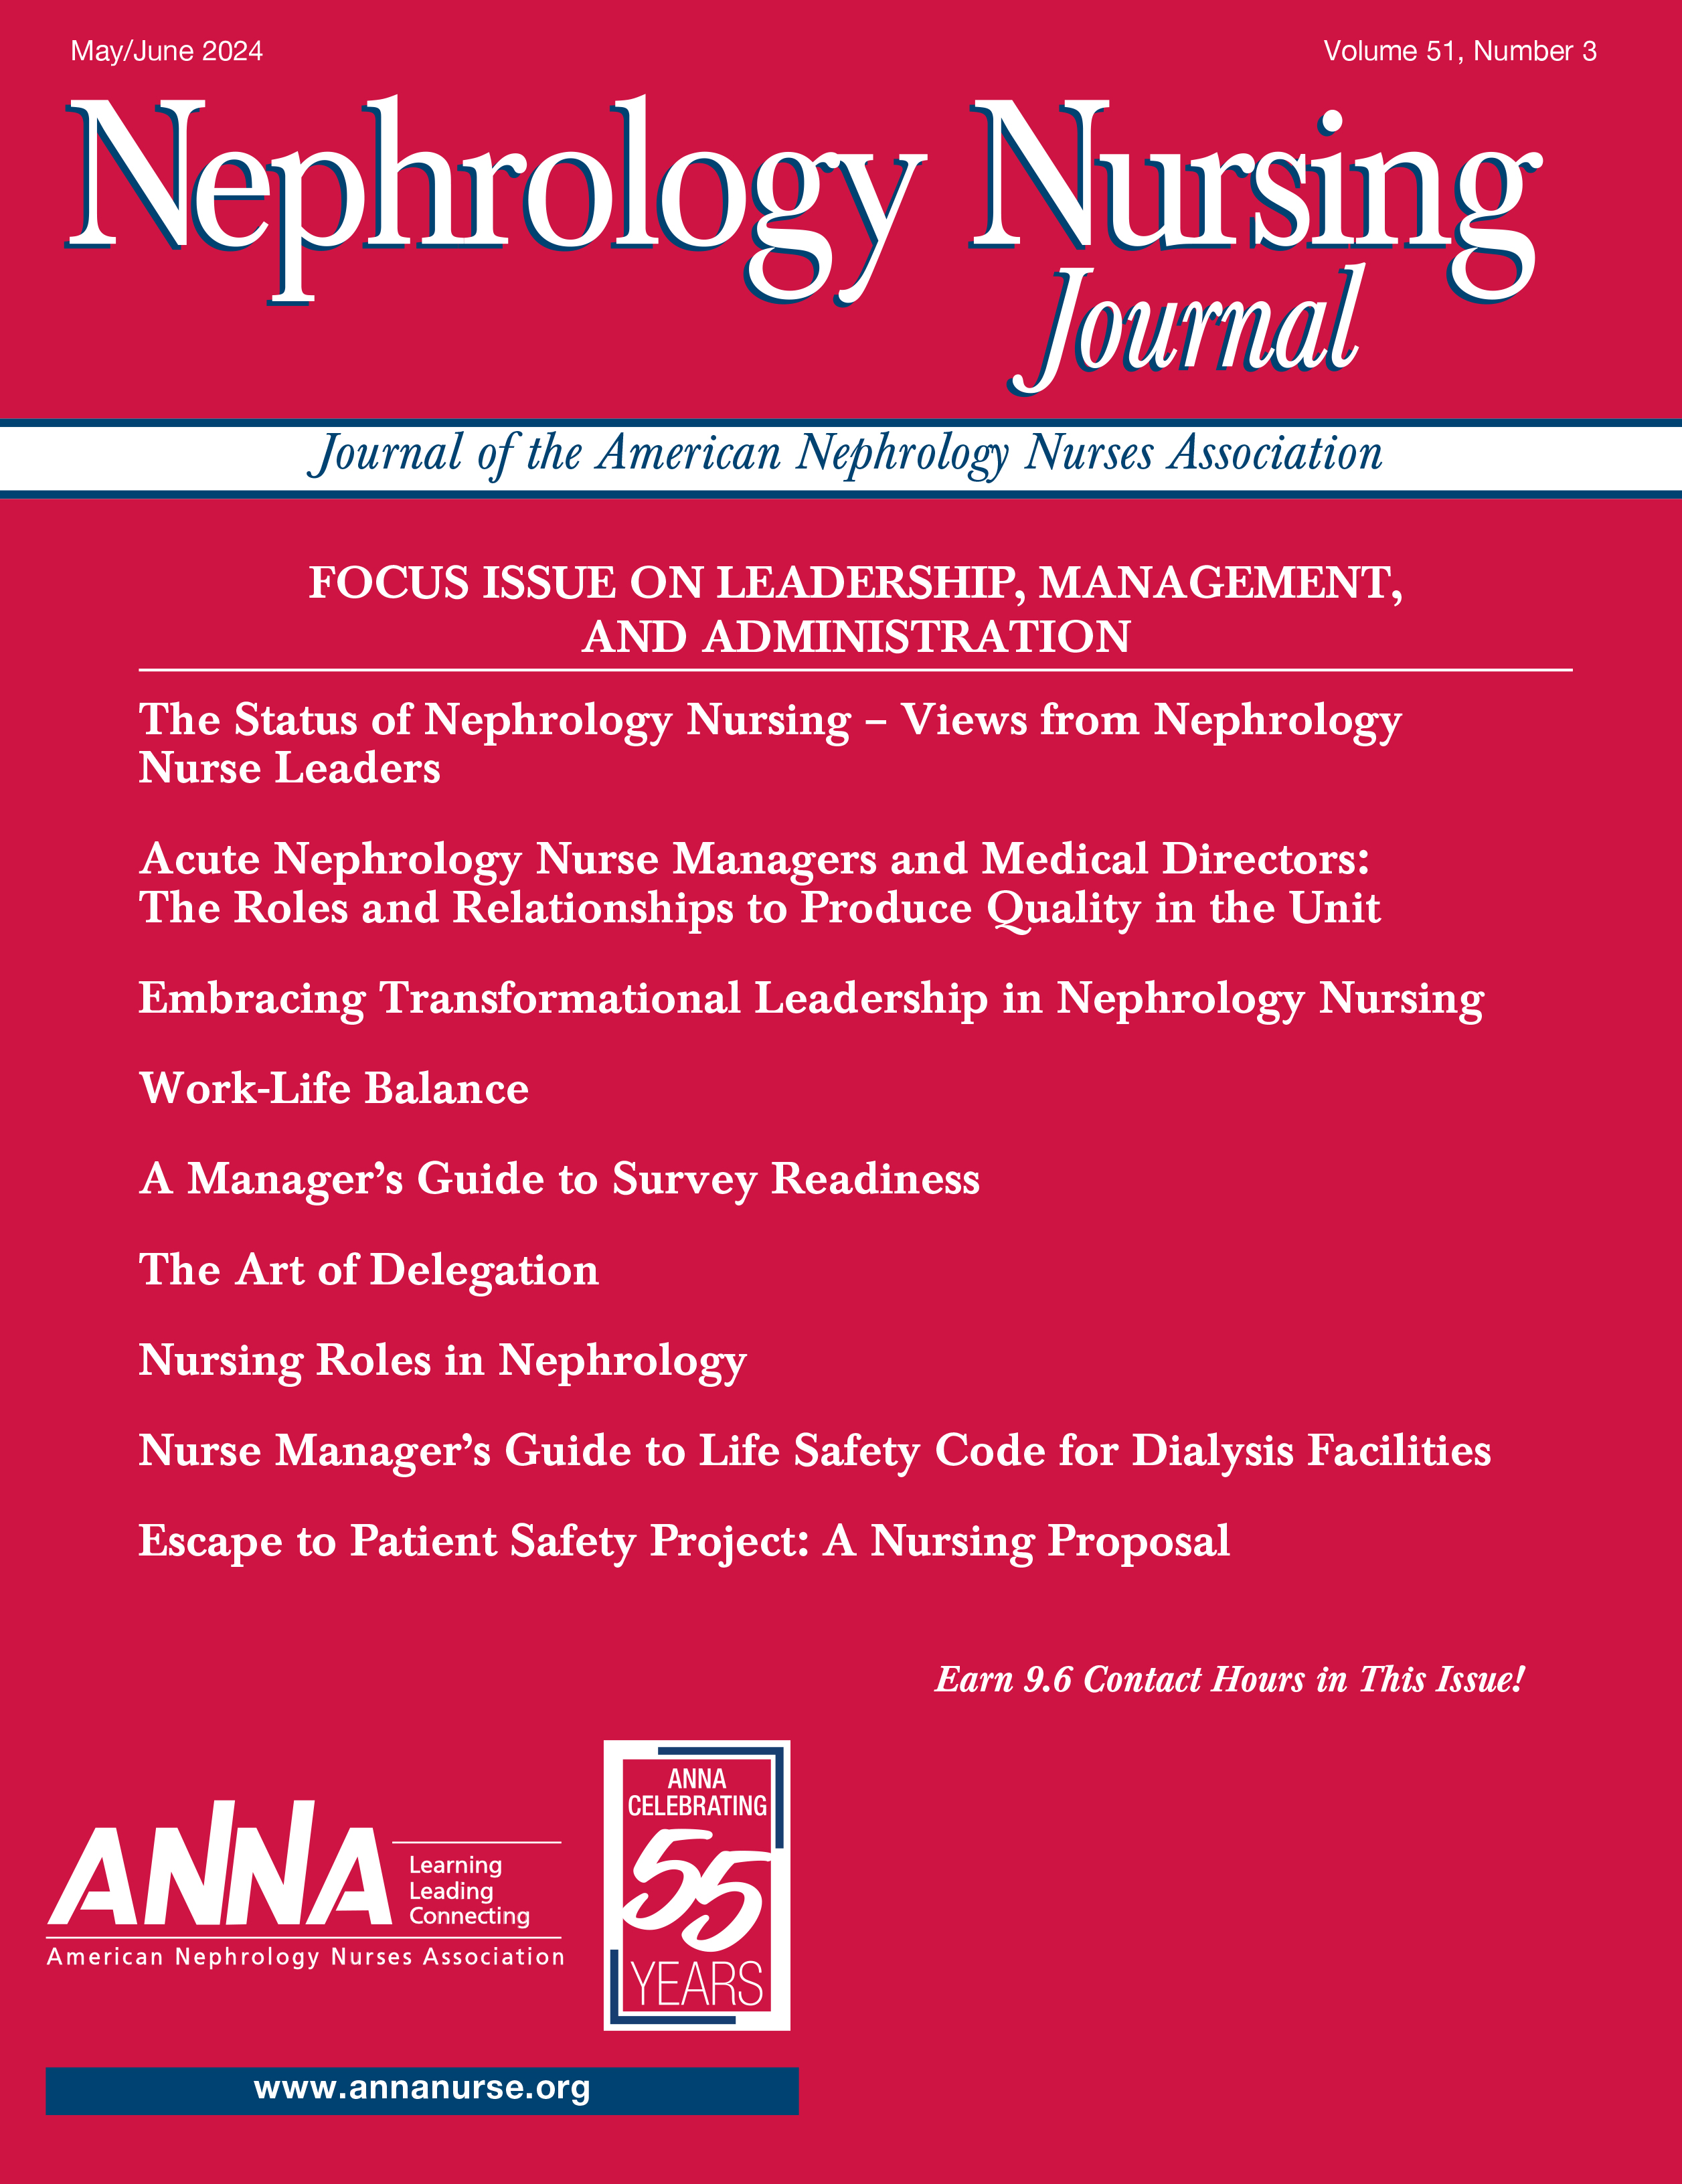 Cover of the May/June Edition